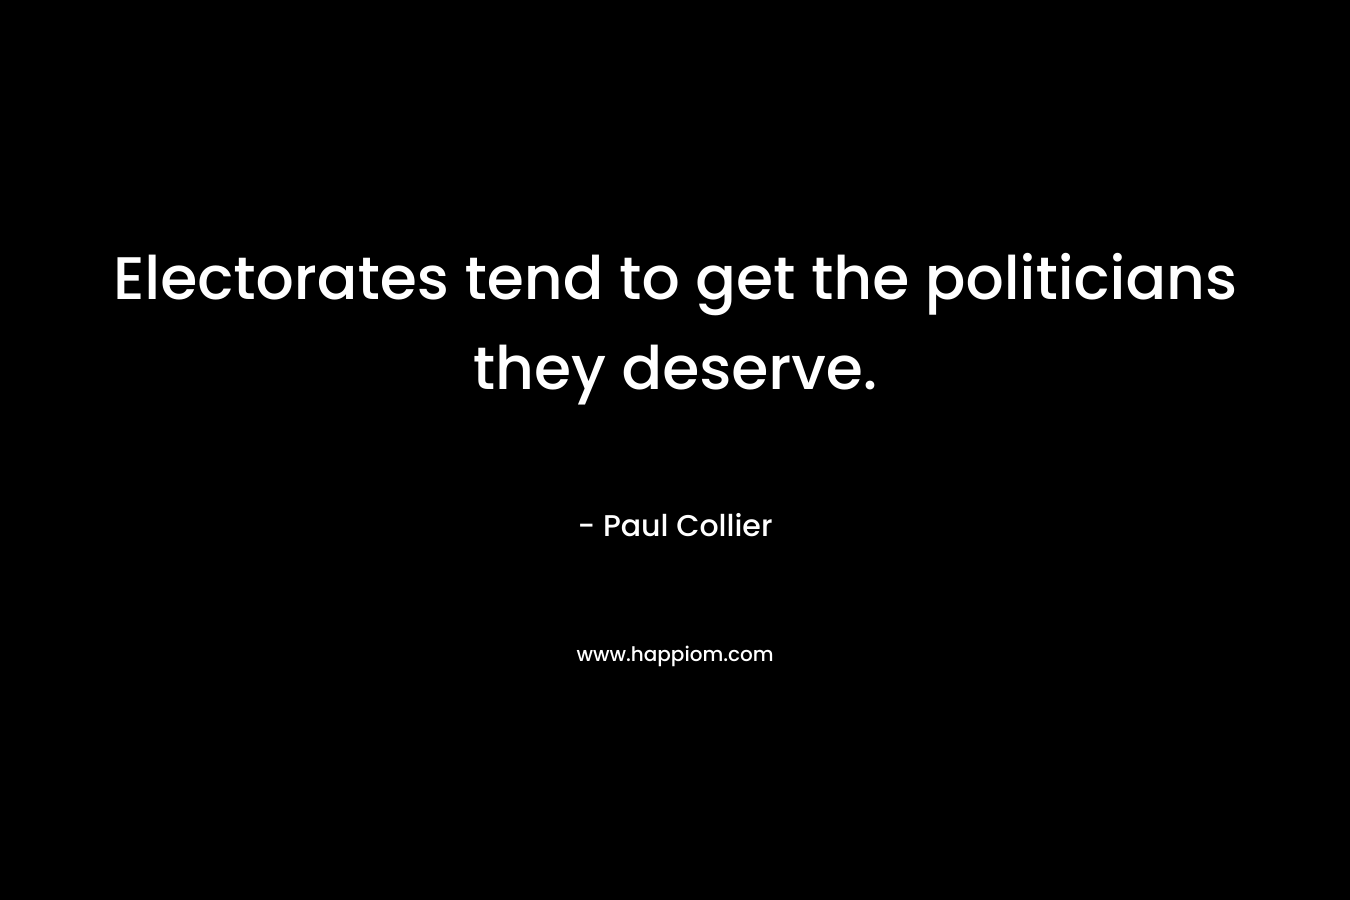 Electorates tend to get the politicians they deserve. – Paul Collier